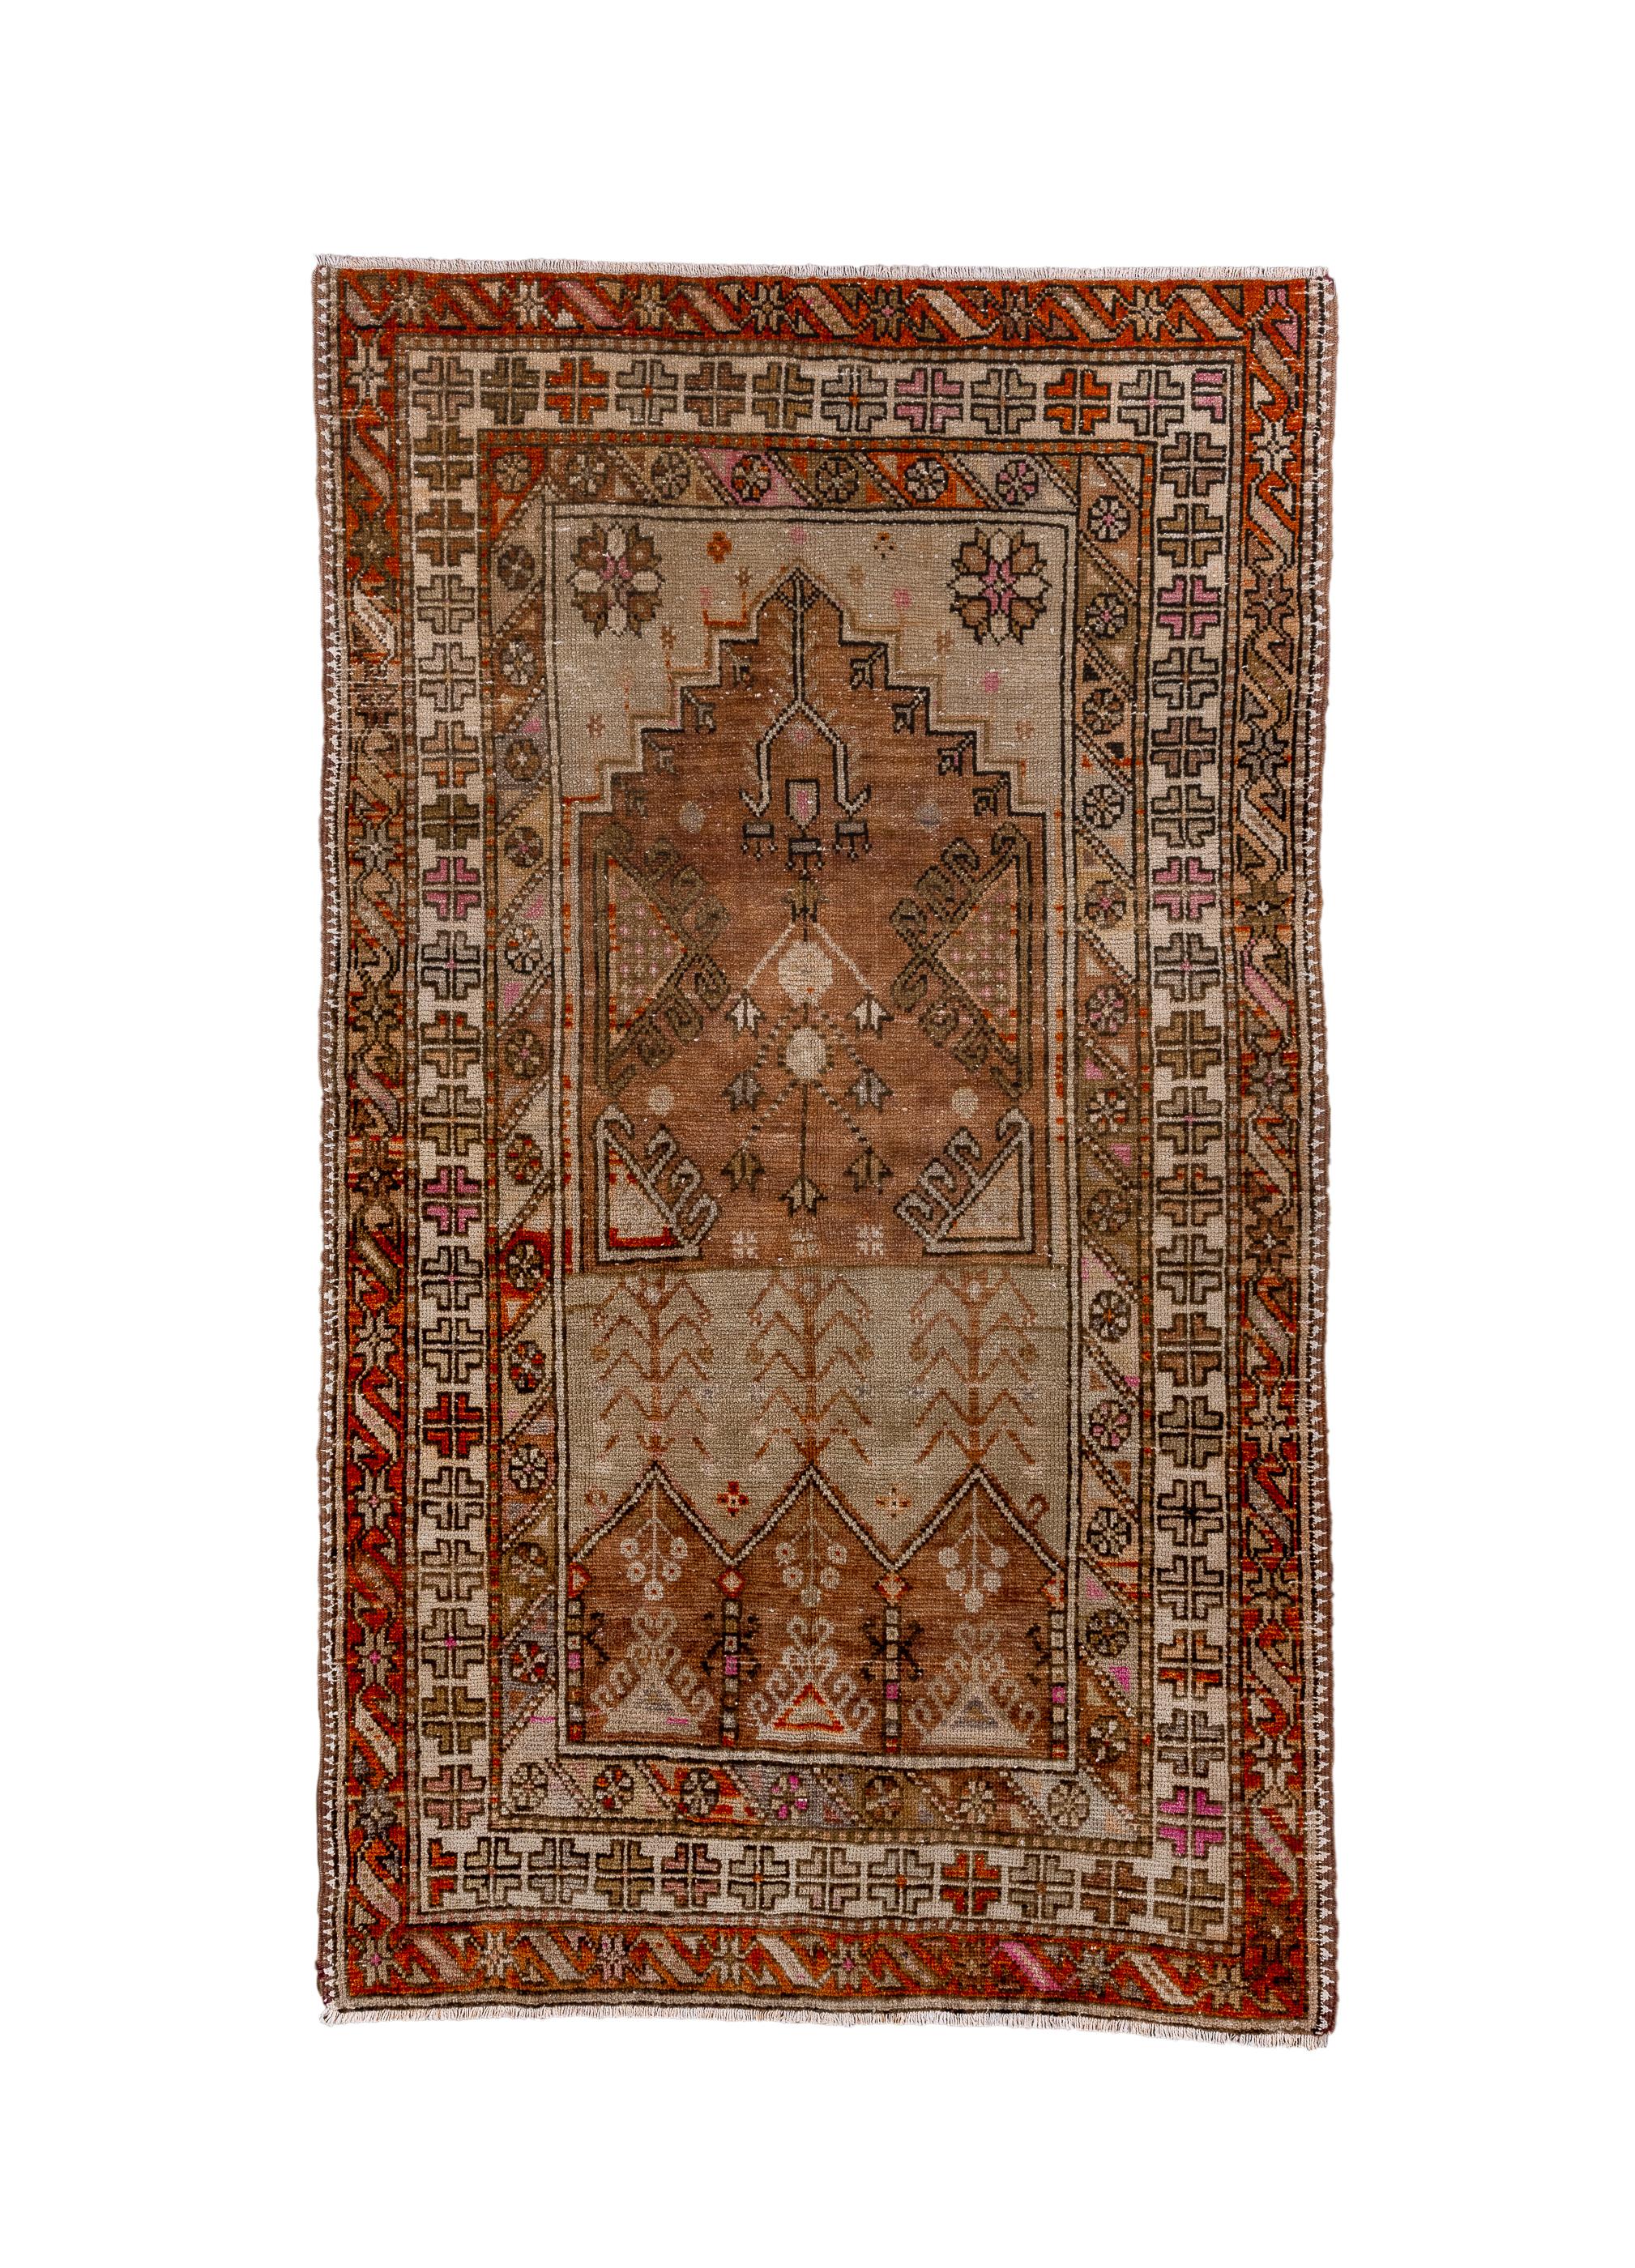 This Central Anatolian prayer layout scatter shows  a stepped red niche field ornamented by triangles,  with three red lappets below and rosette patterned spandrels above. Main ecru border with sectioned  crosses, diagonally paneled inner minor and 